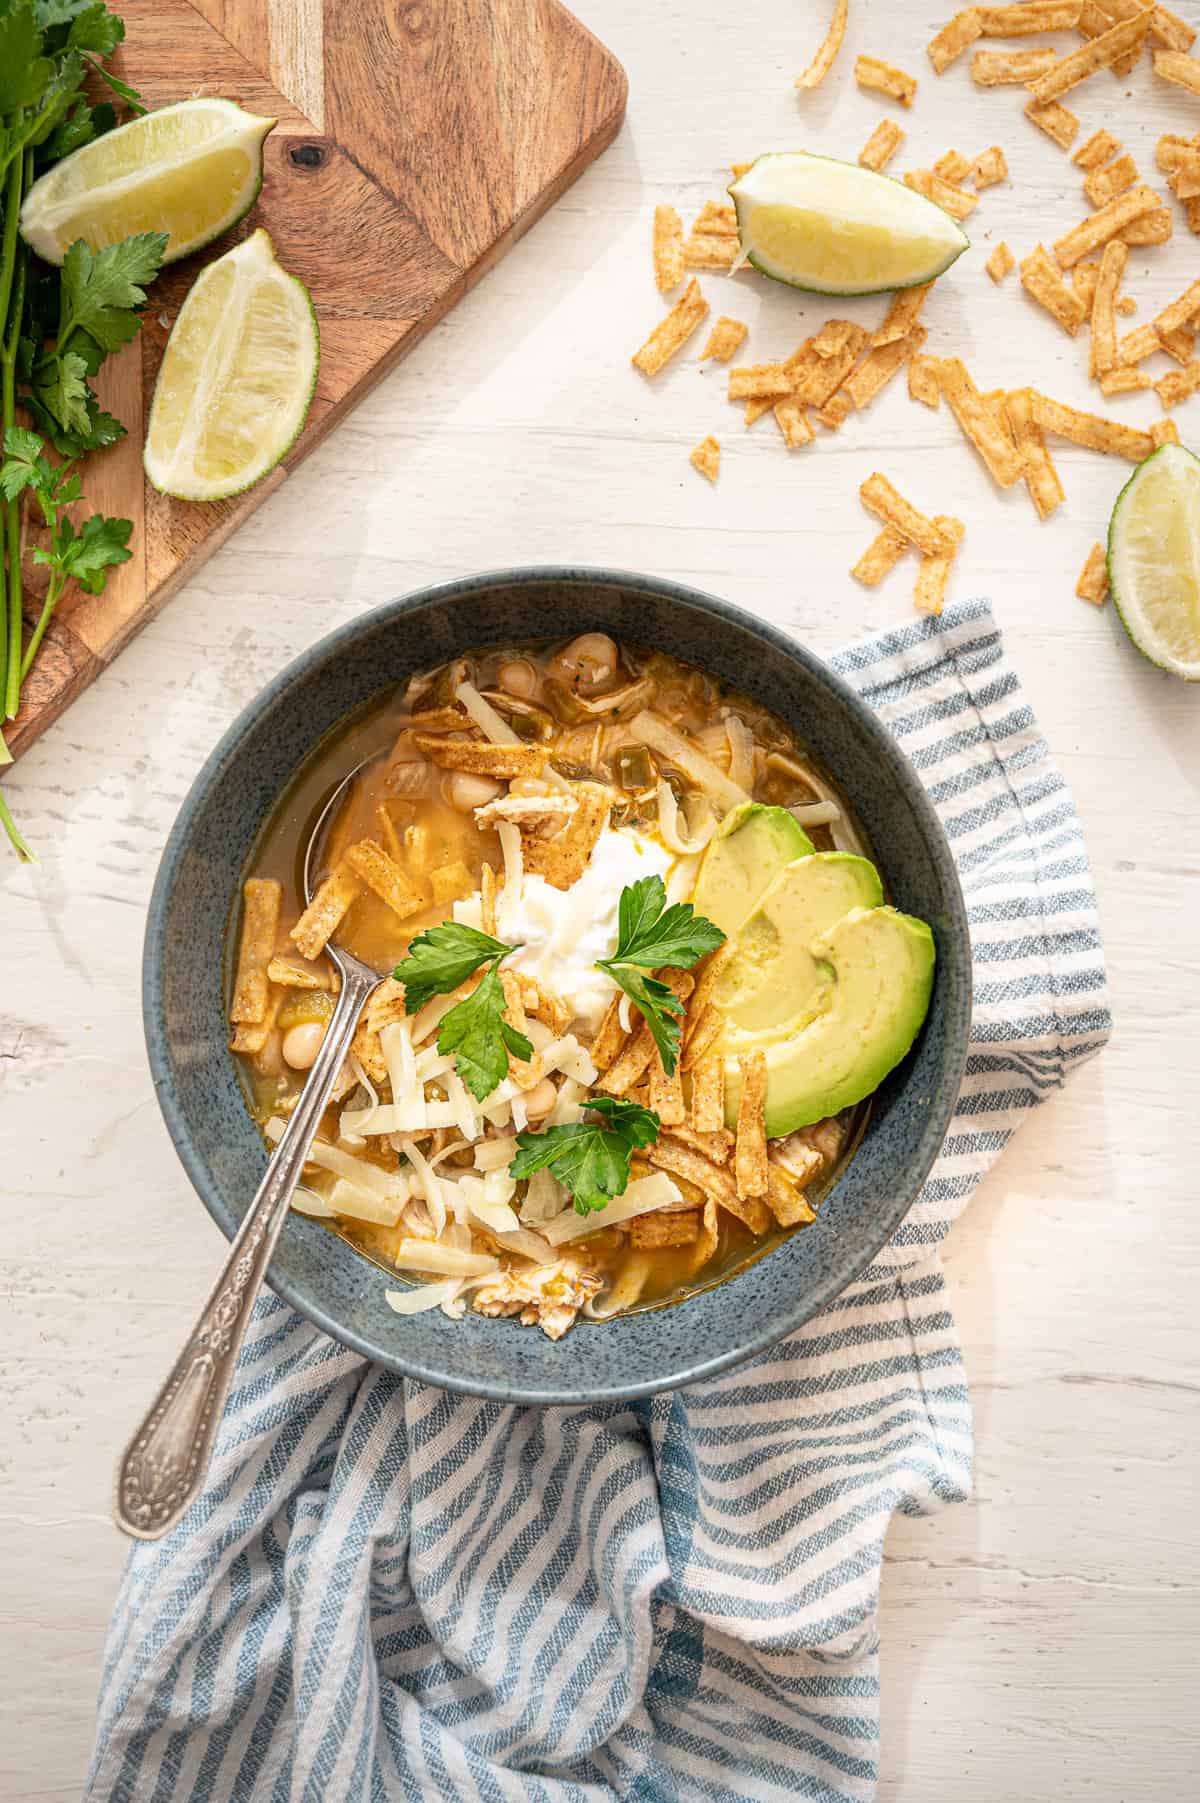 White chicken chili in a gray bowl with avocado slices, a dollop of sour cream, and fresh parsley on top.